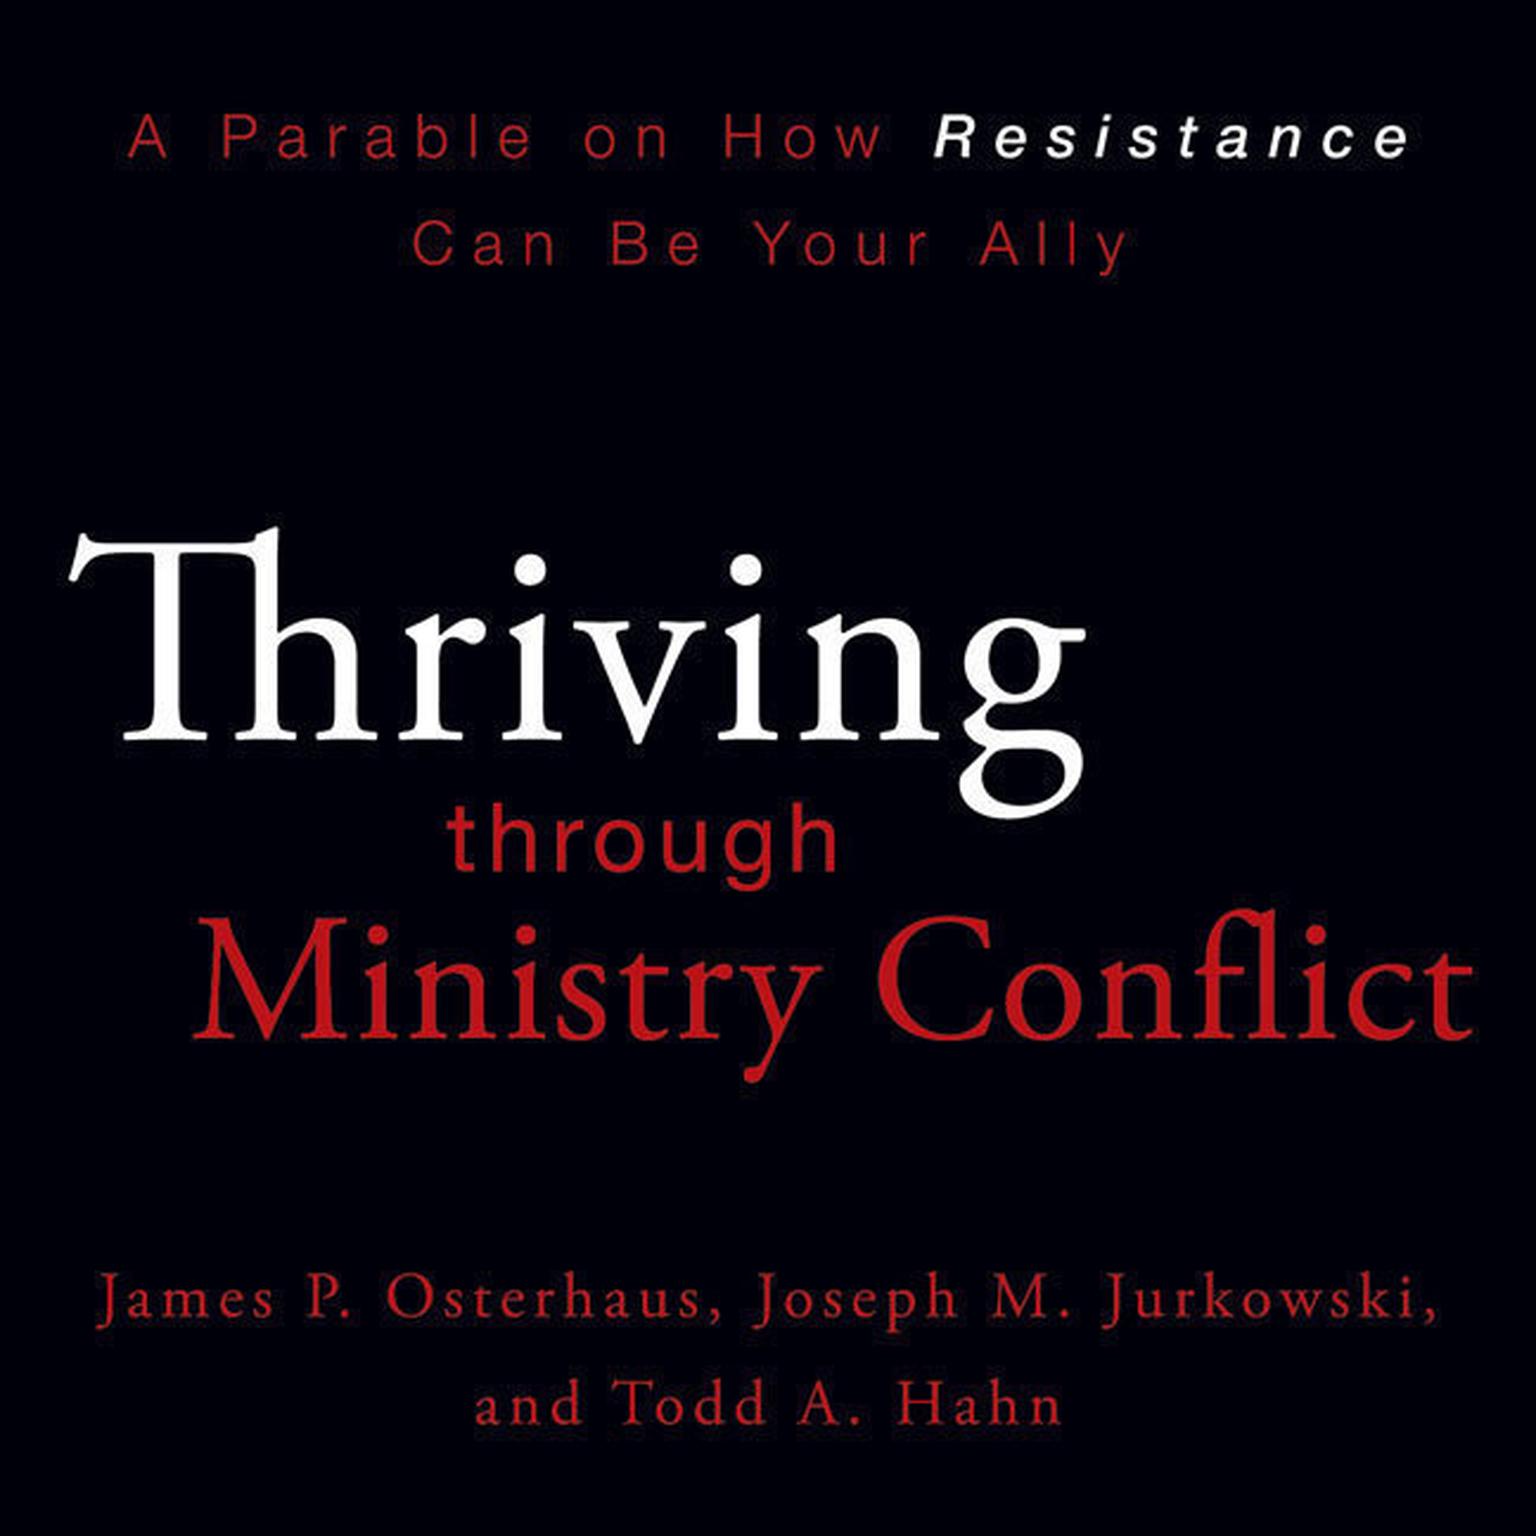 Thriving through Ministry Conflict: A Parable on How Resistance Can Be Your Ally Audiobook, by James P. Osterhaus